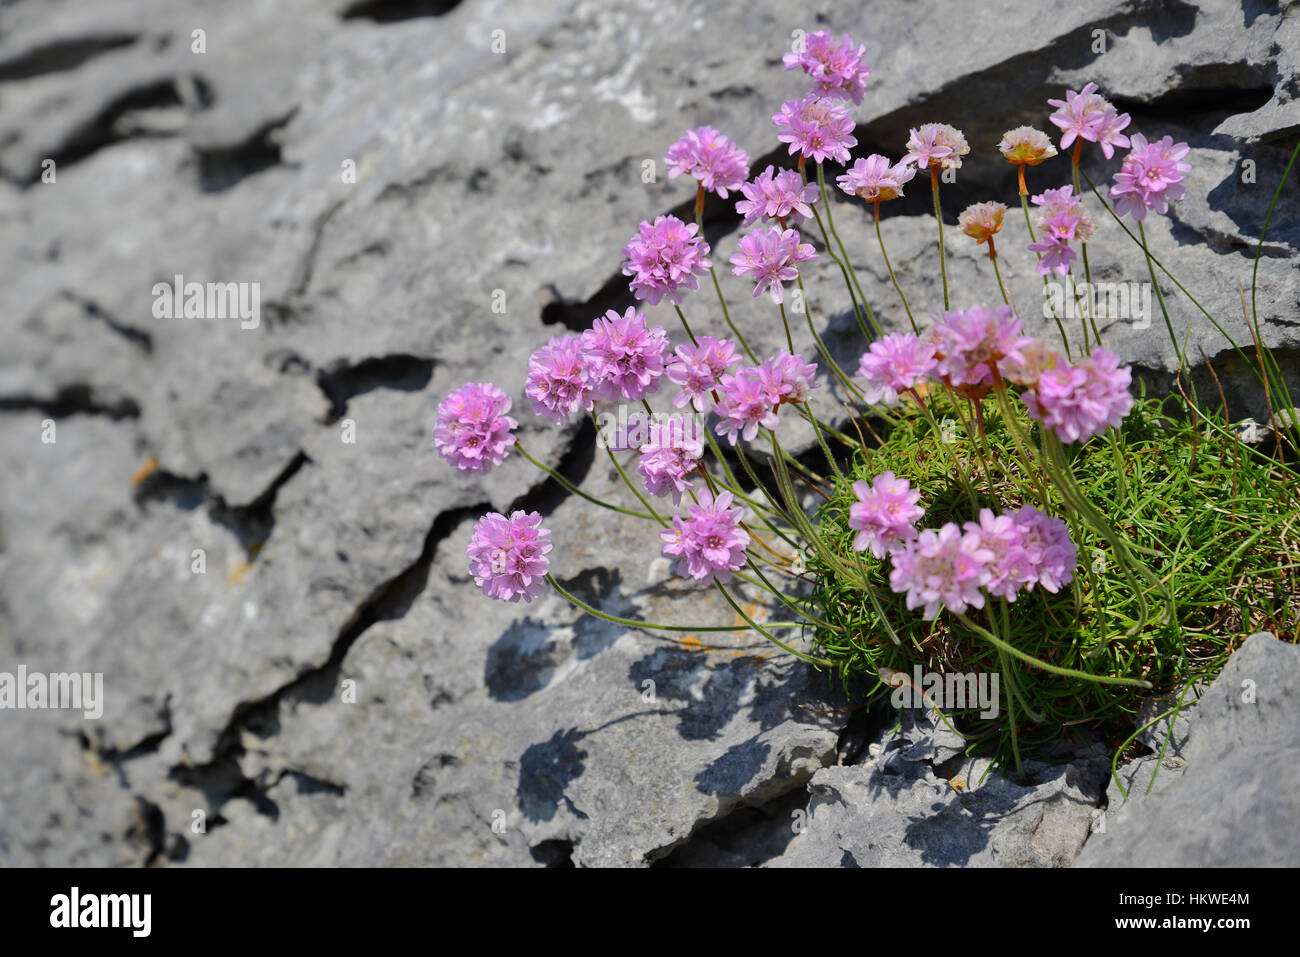 Flowers growing on the rocky landscape of the Burren on the west coast of Ireland Stock Photo